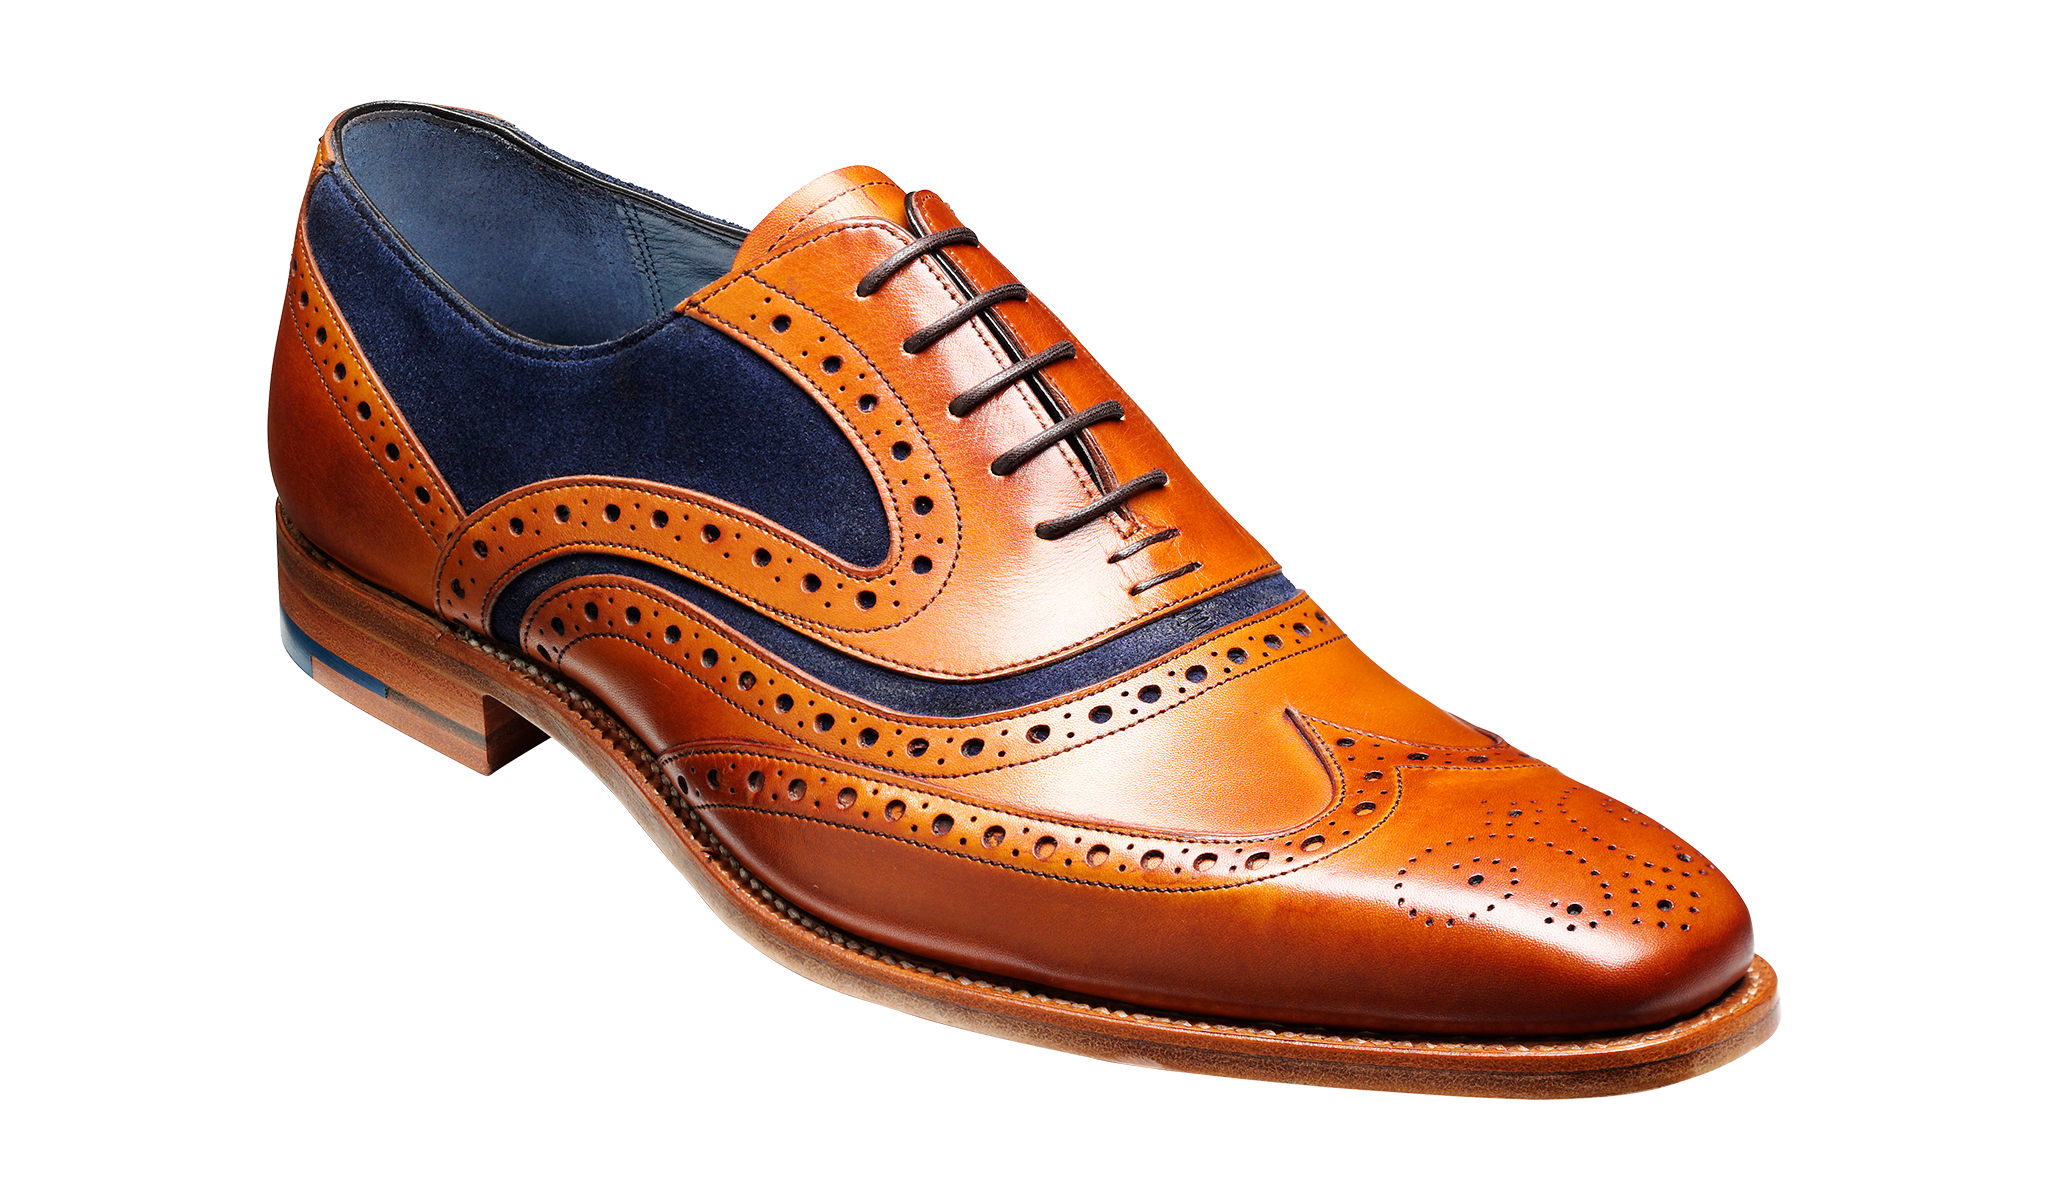 McClean - Men's leather brogue from Barker